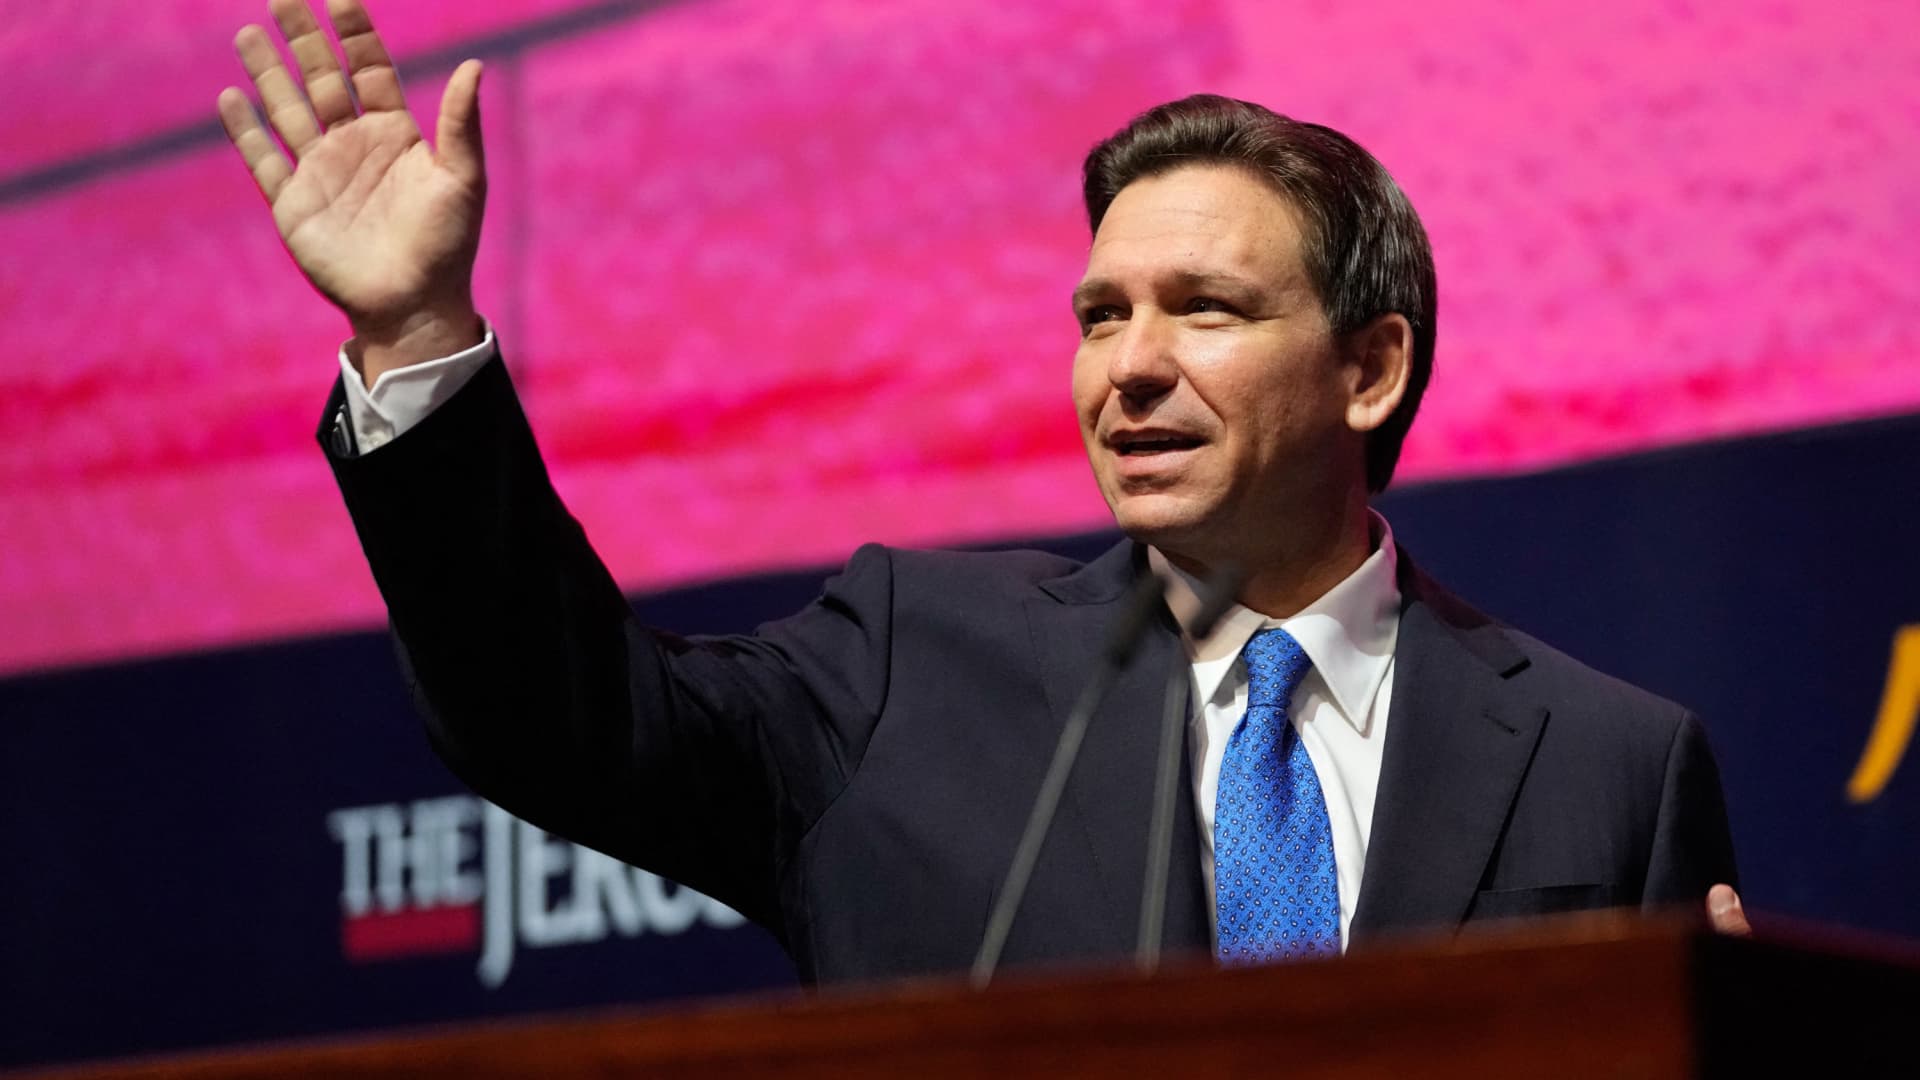 DeSantis used Florida’s whirlwind legislative session as a potential presidential launching pad